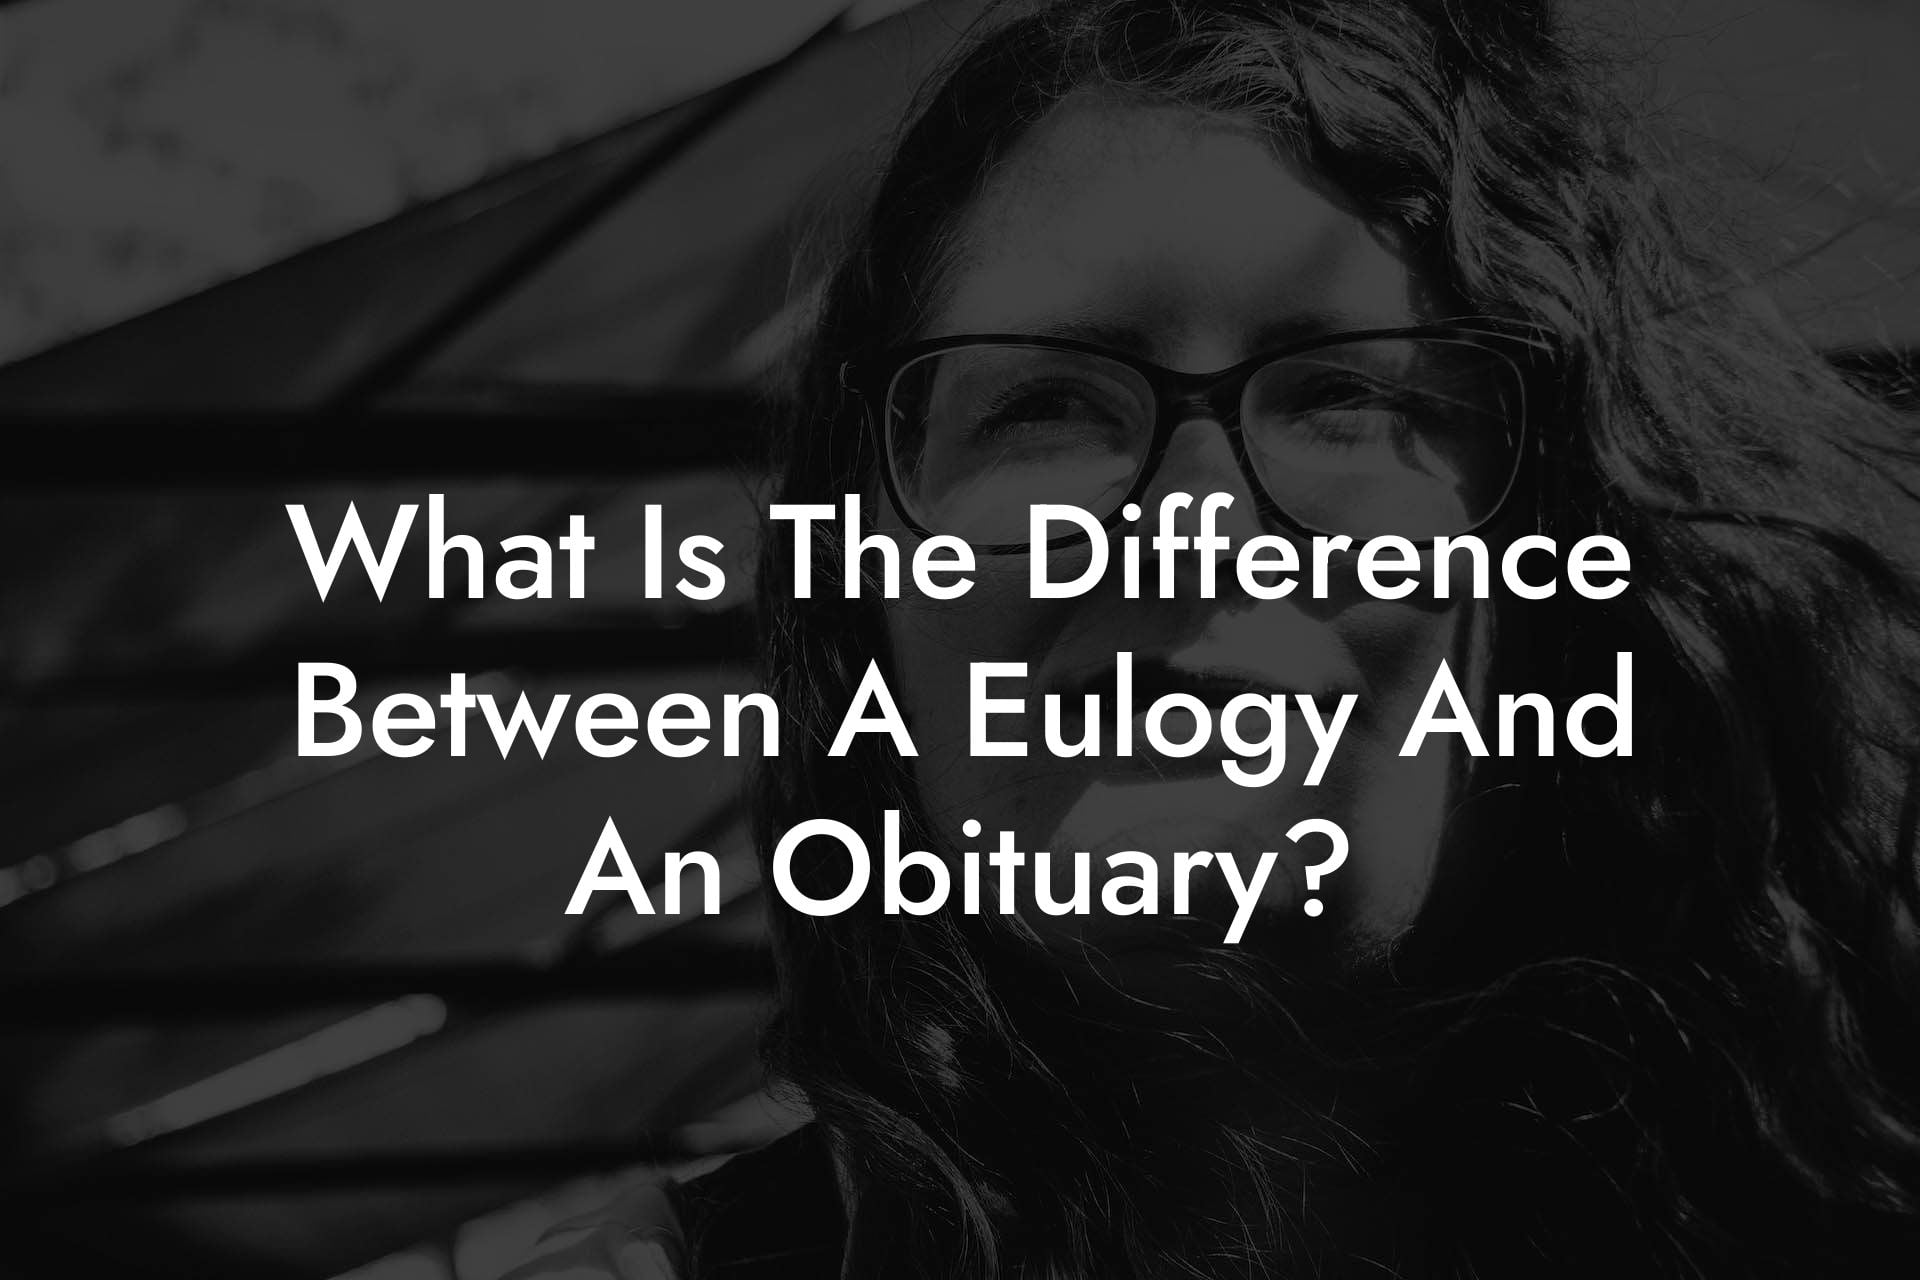 What Is The Difference Between A Eulogy And An Obituary?